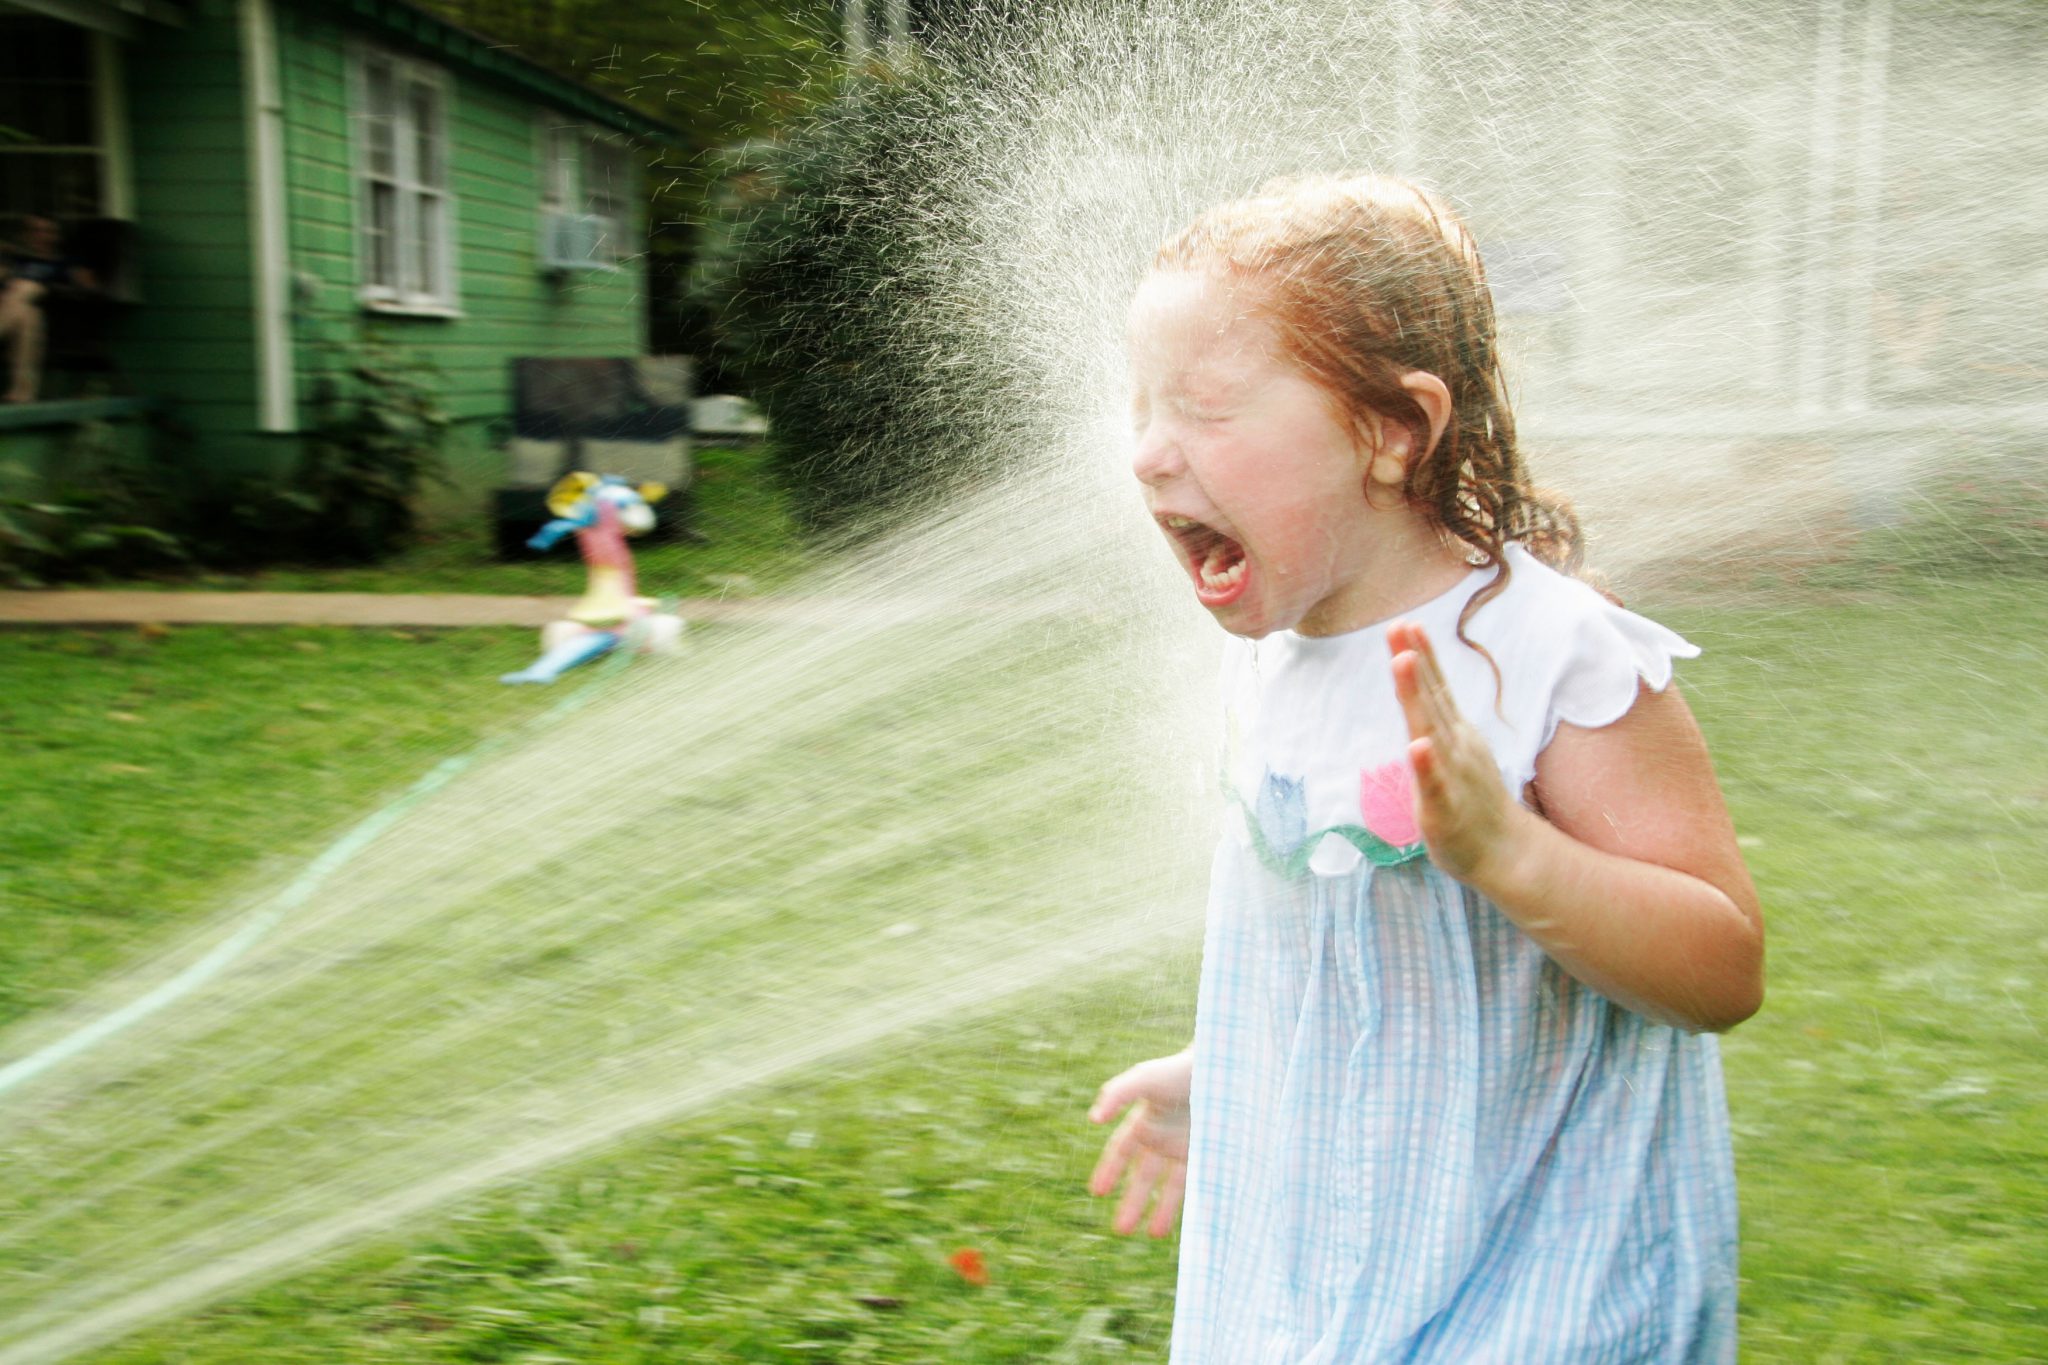 A little girl getting sprayed by a stream of water.